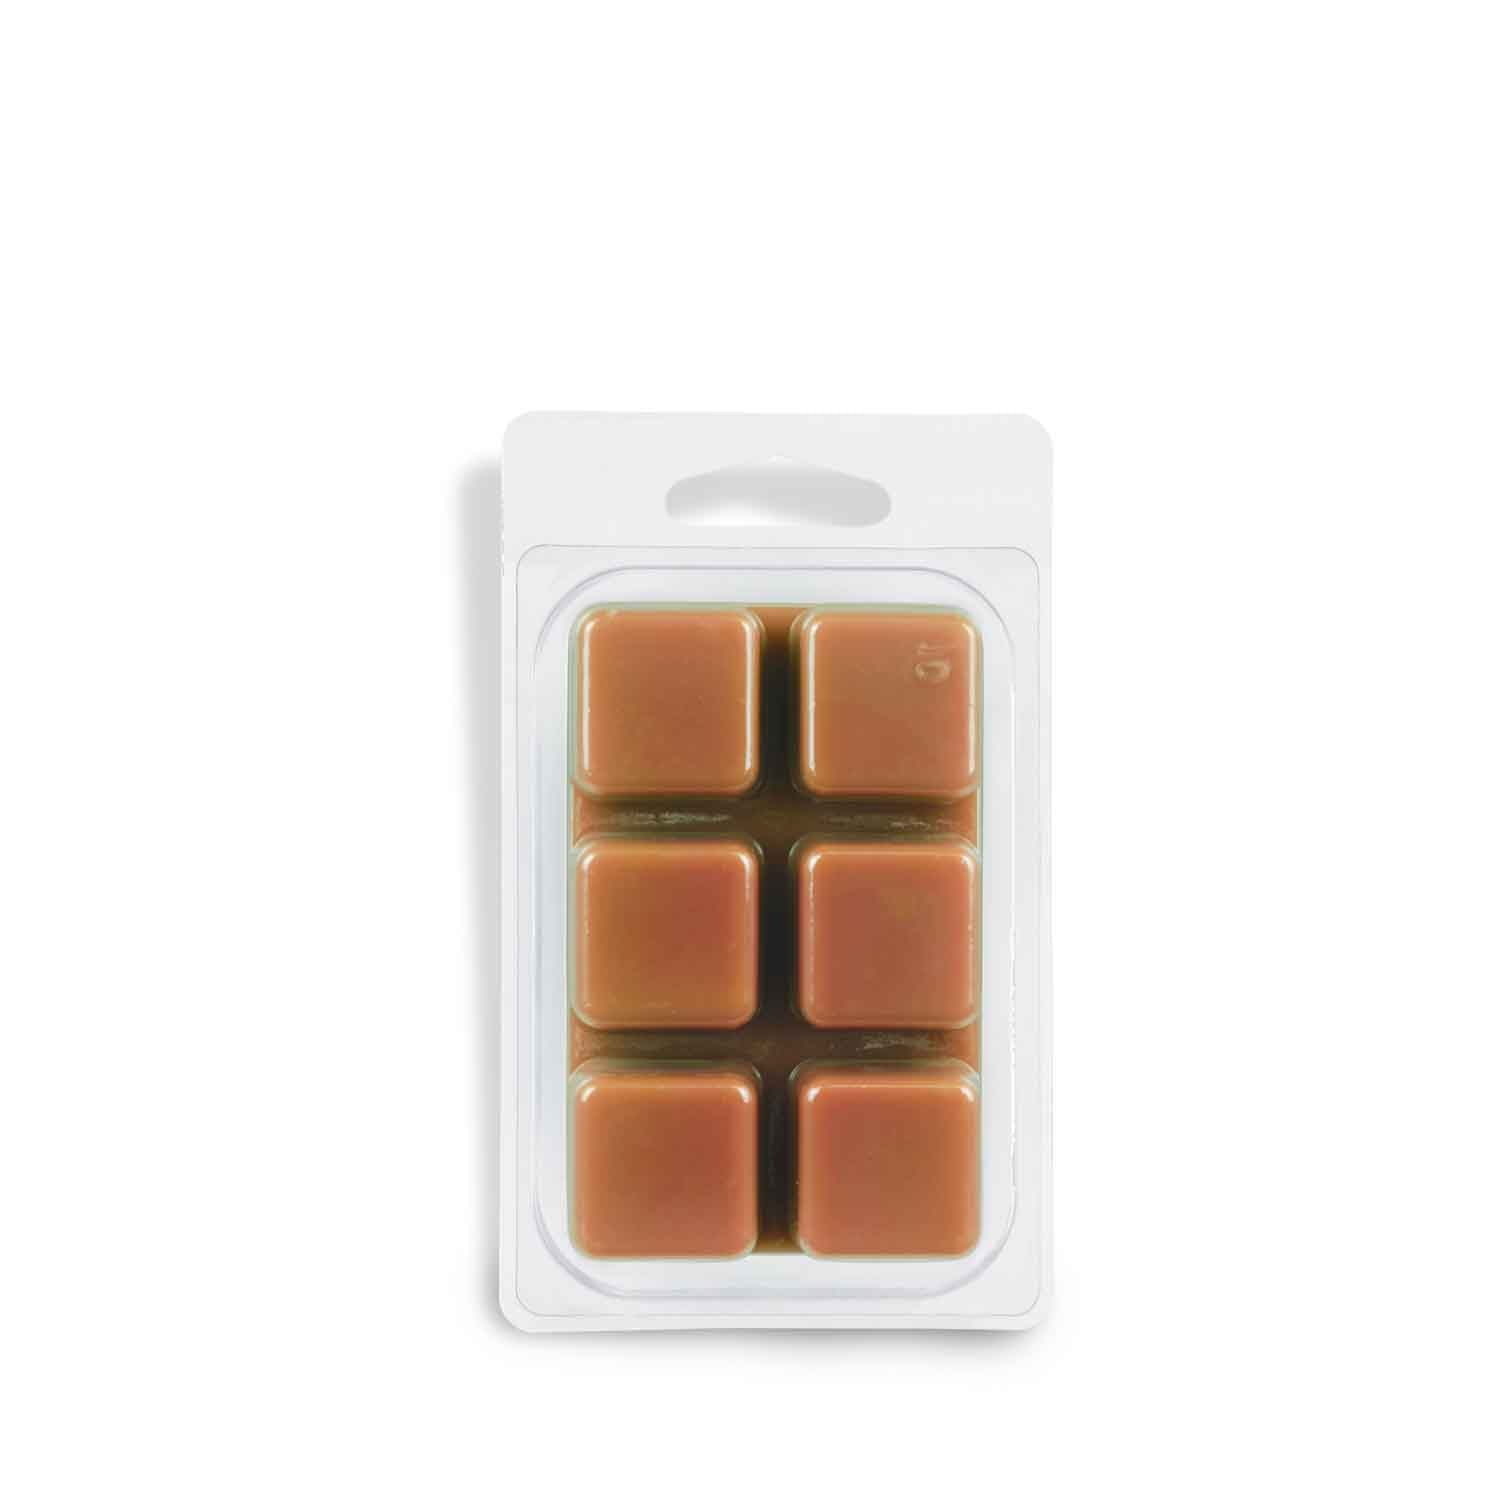 A pack of Tuscany Candle® French Toast Scented Wax Melt (2.5 oz) tart bars on a white background.